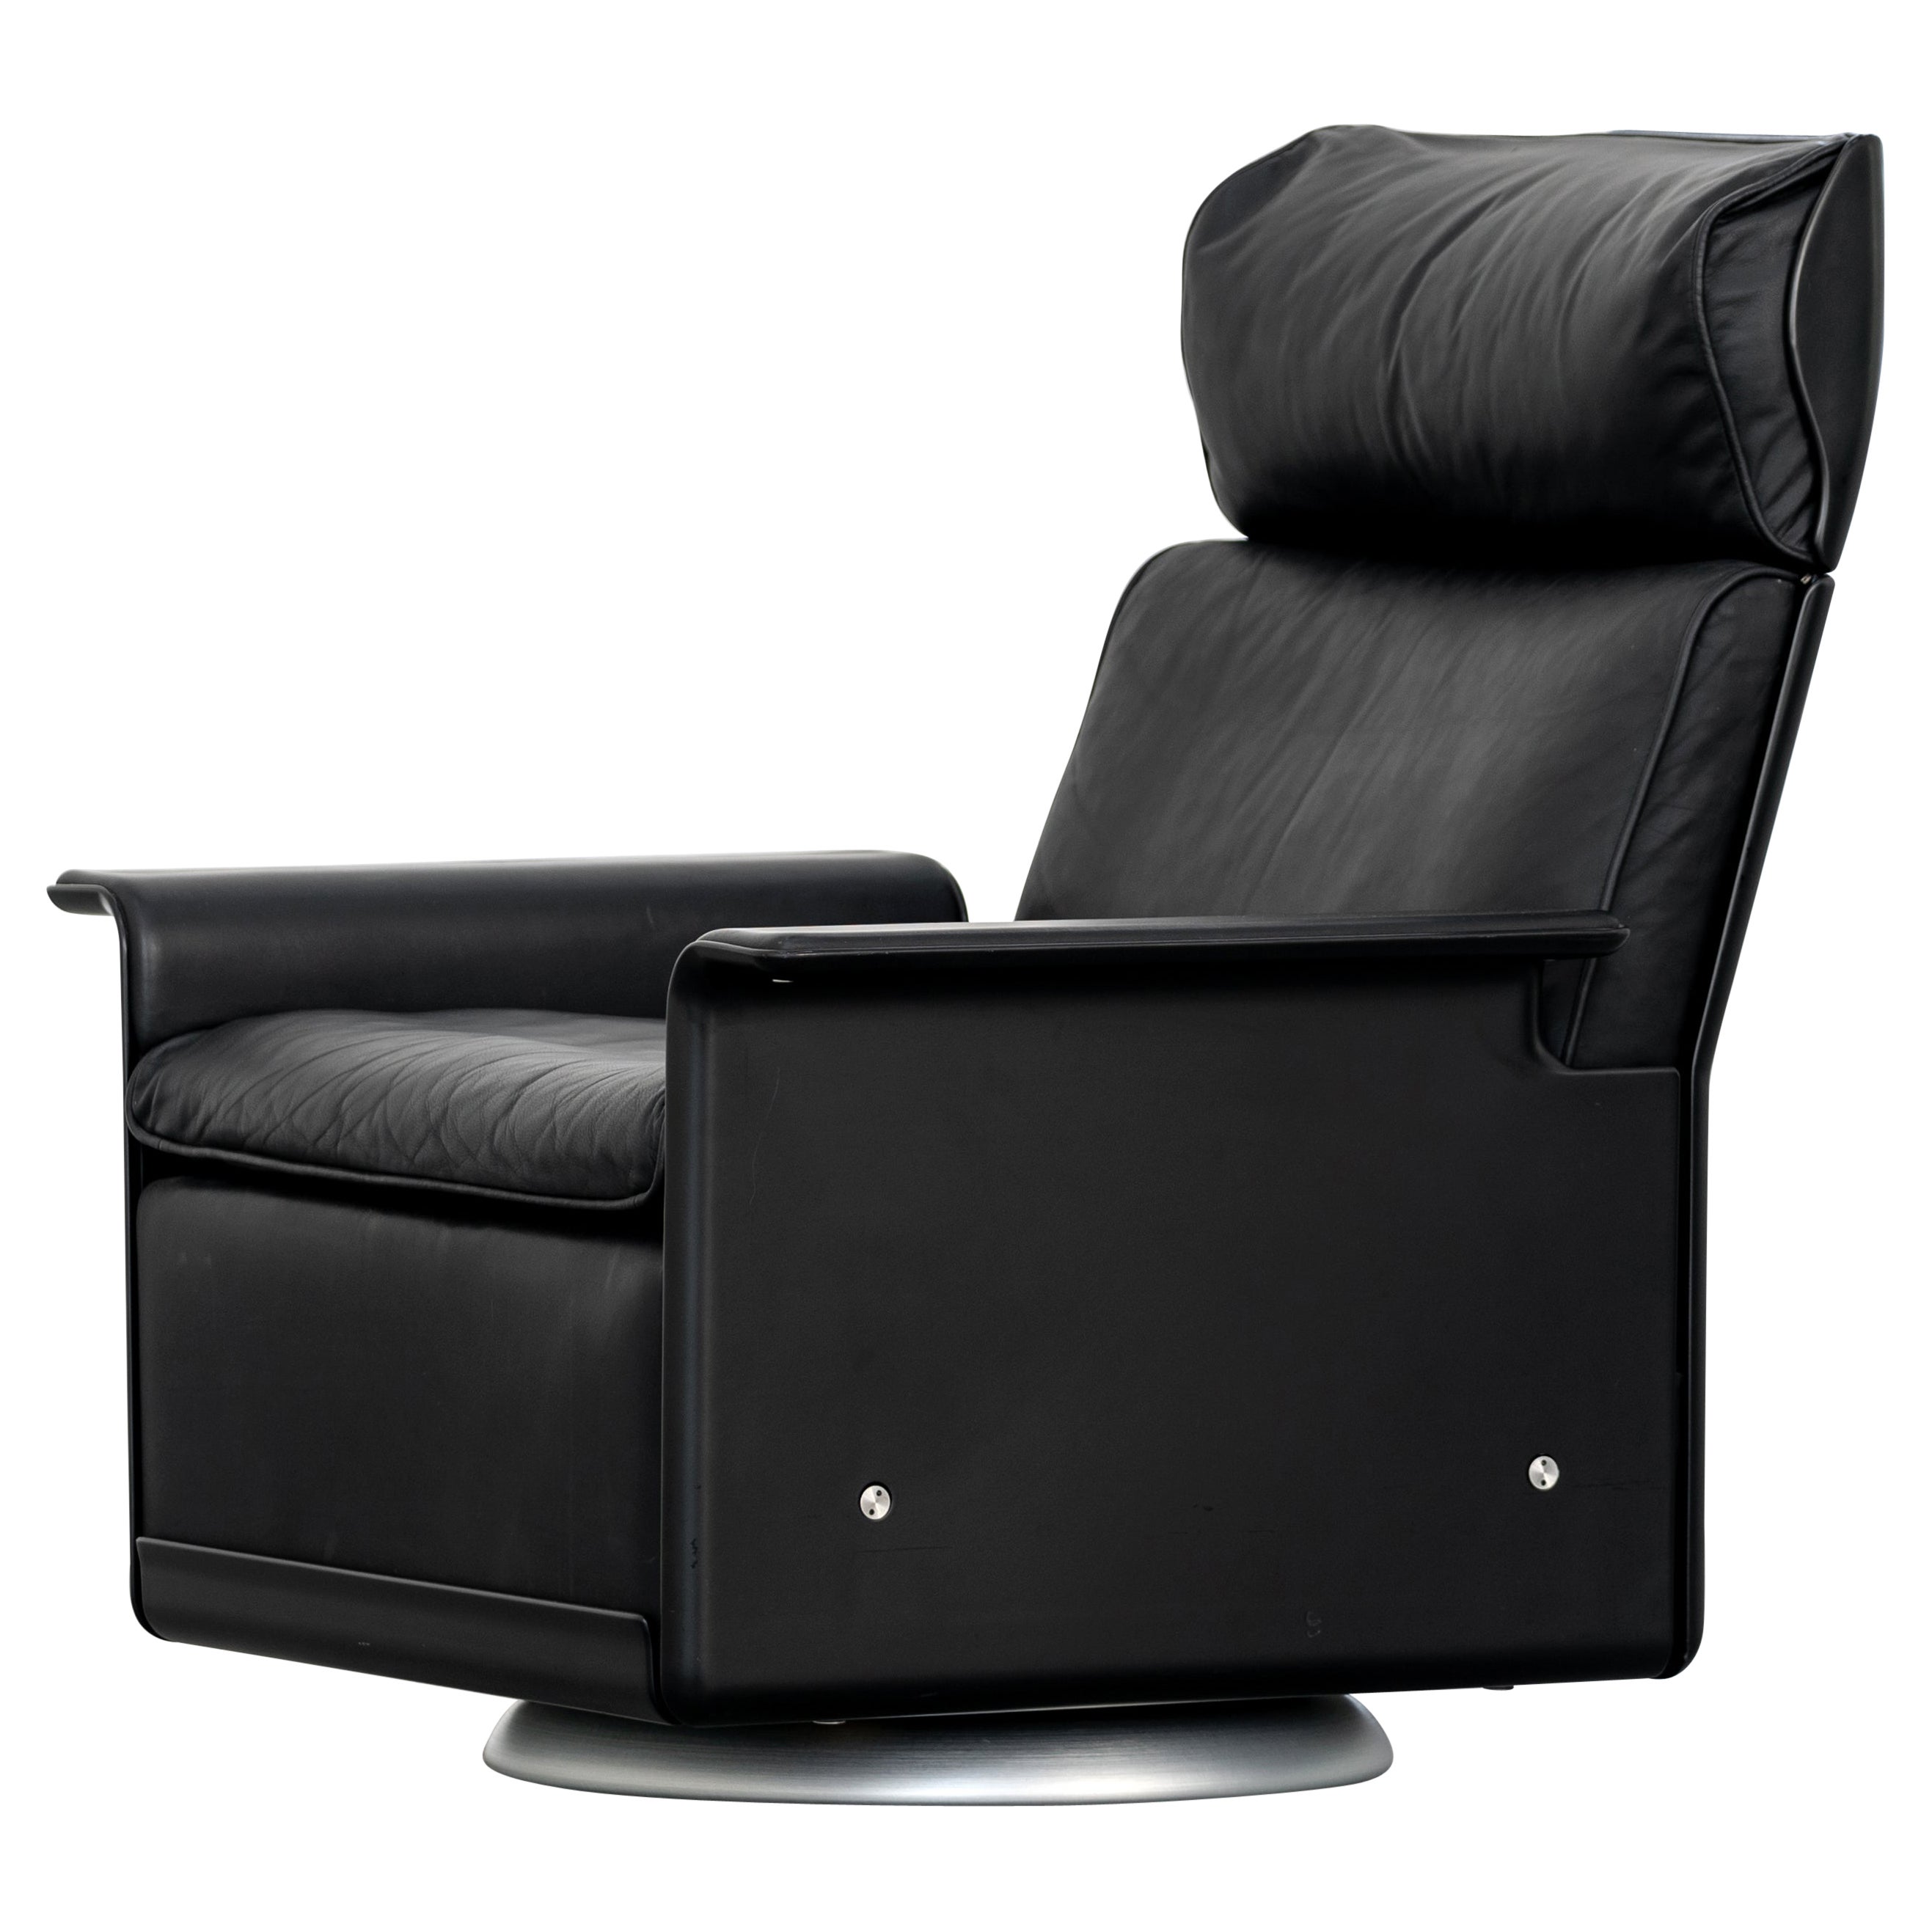 Dieter Rams, 620 Lounge Chair - rare Swivel Base by Vitsœ in black Leather, 1962